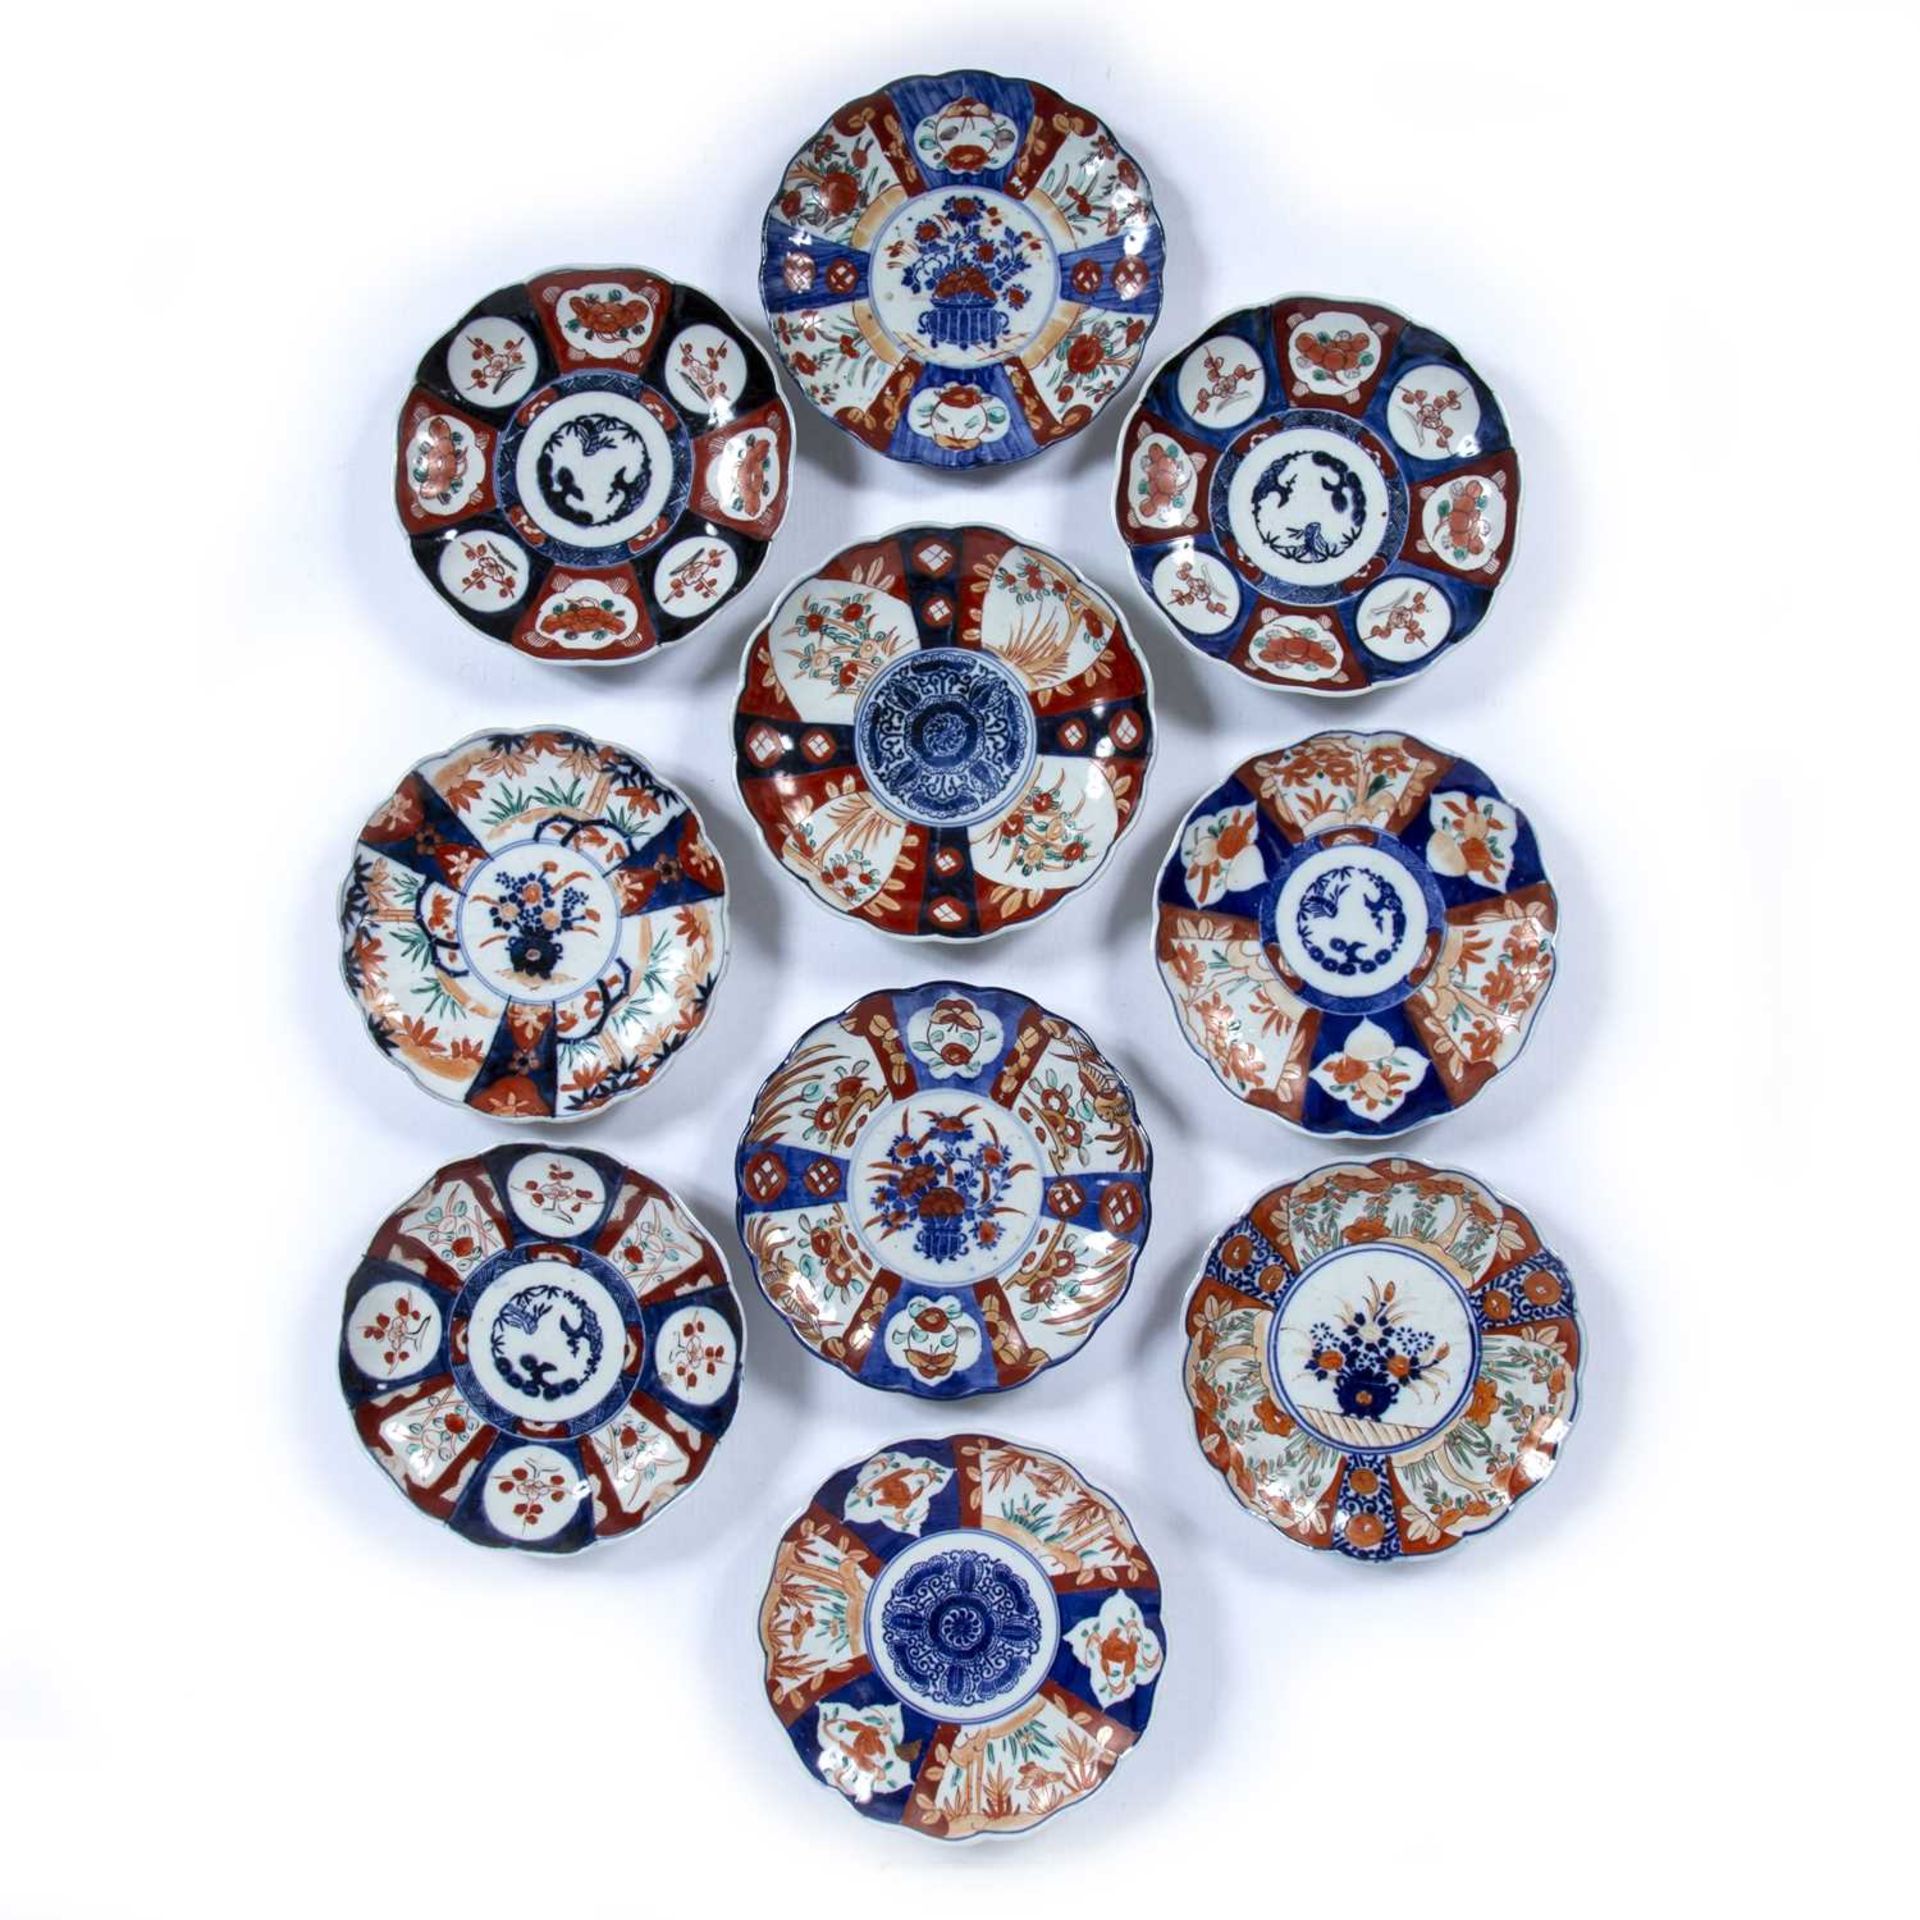 Ten Imari plates Japanese, decorated with bamboo and other plants in the imari palette, each plate